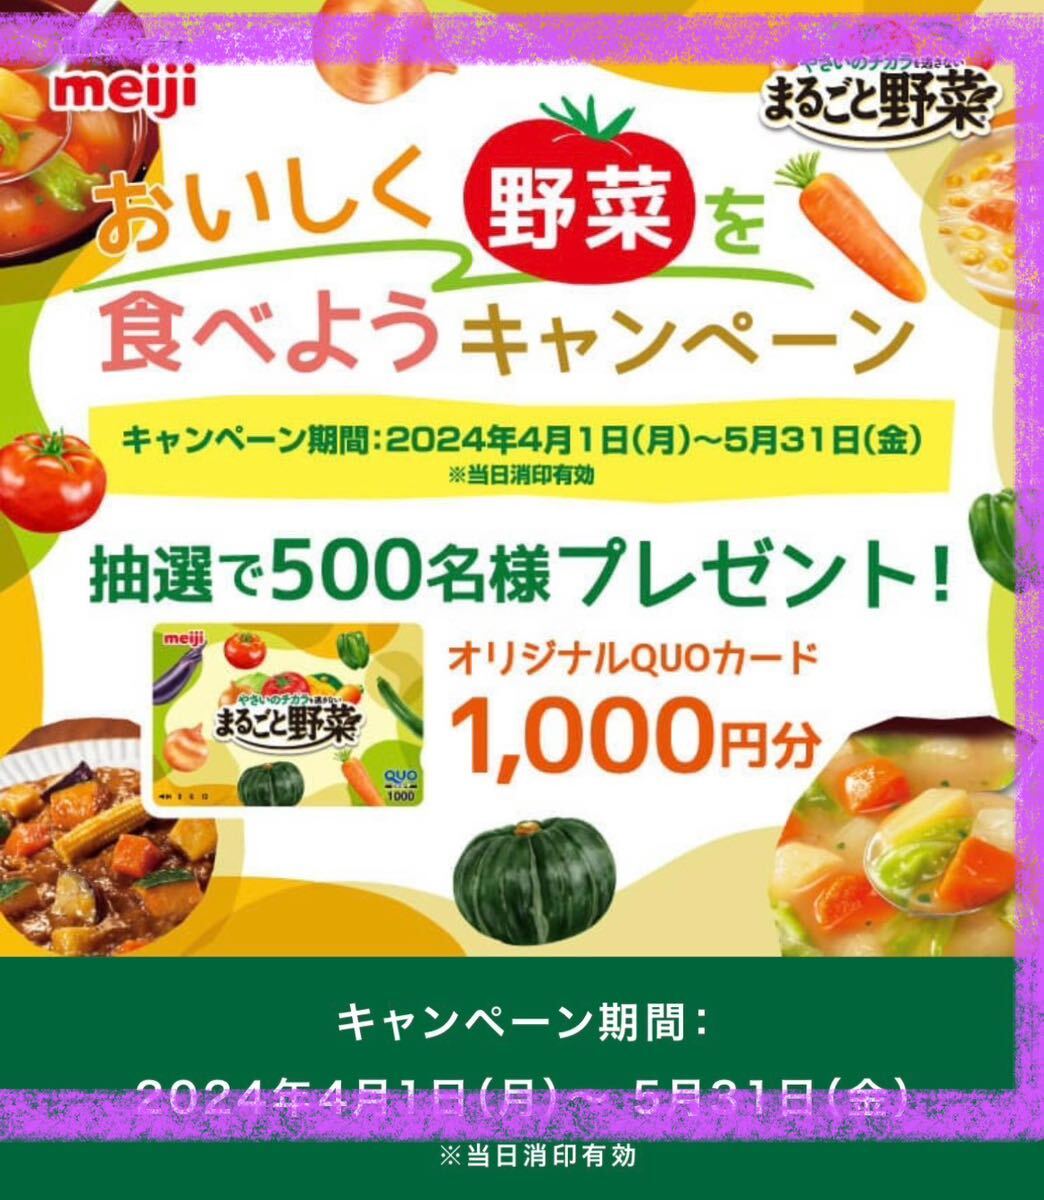  prize application # Meiji # wholly vegetable .... vegetable . meal . for campaign [re seat 1. minute ] original QUO card . present ..!!